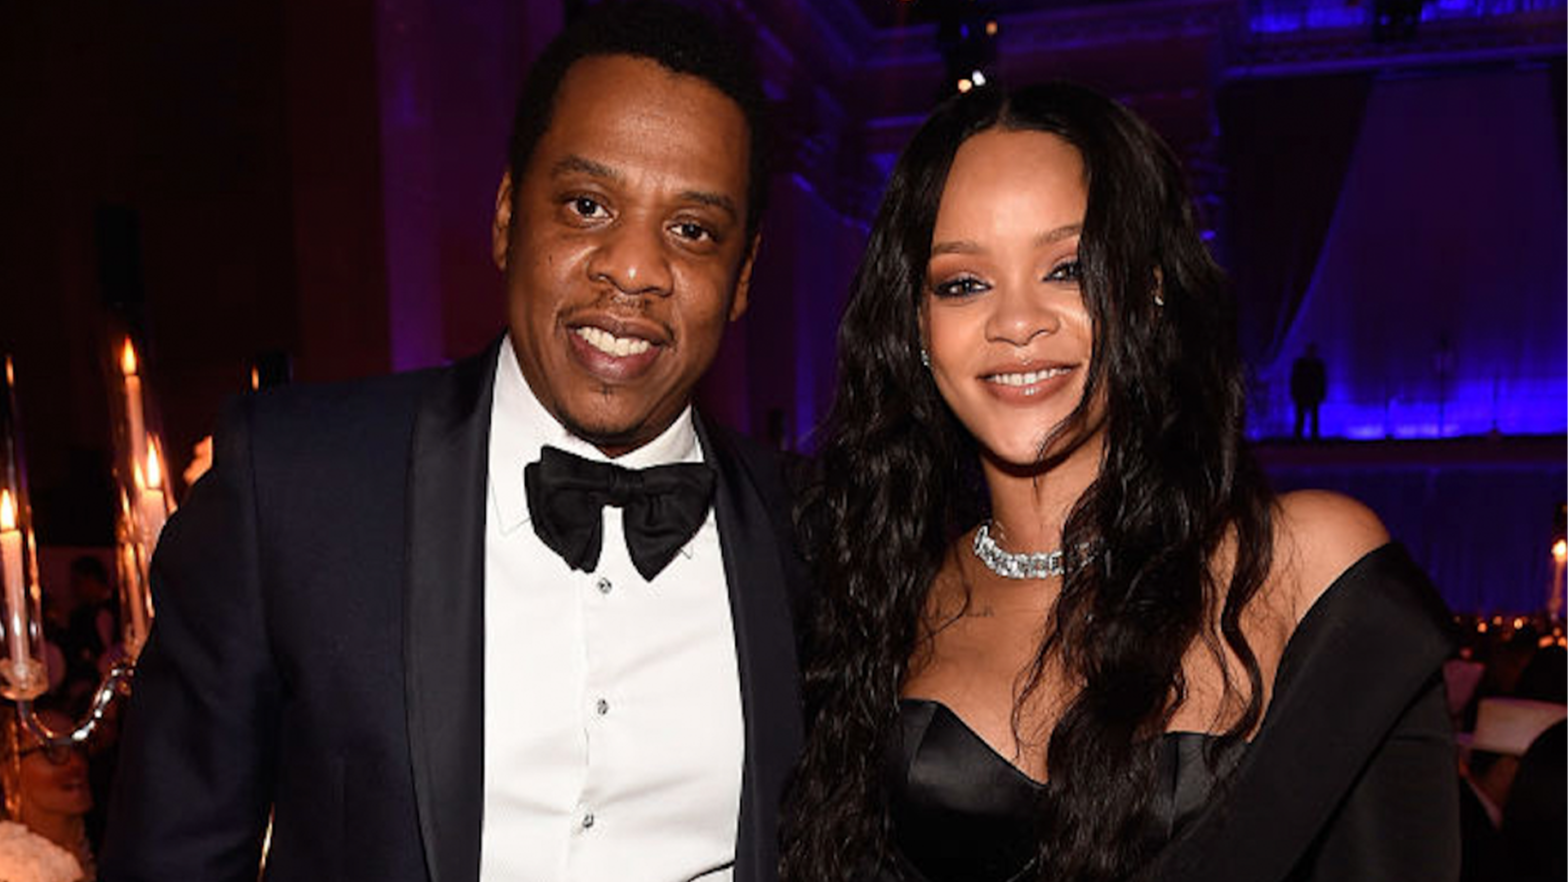 Jay-Z Gives Flowers To Rihanna, Says She's 'One Of The Most Prominent Artists Ever. Self-Made In Business And Entertainment'